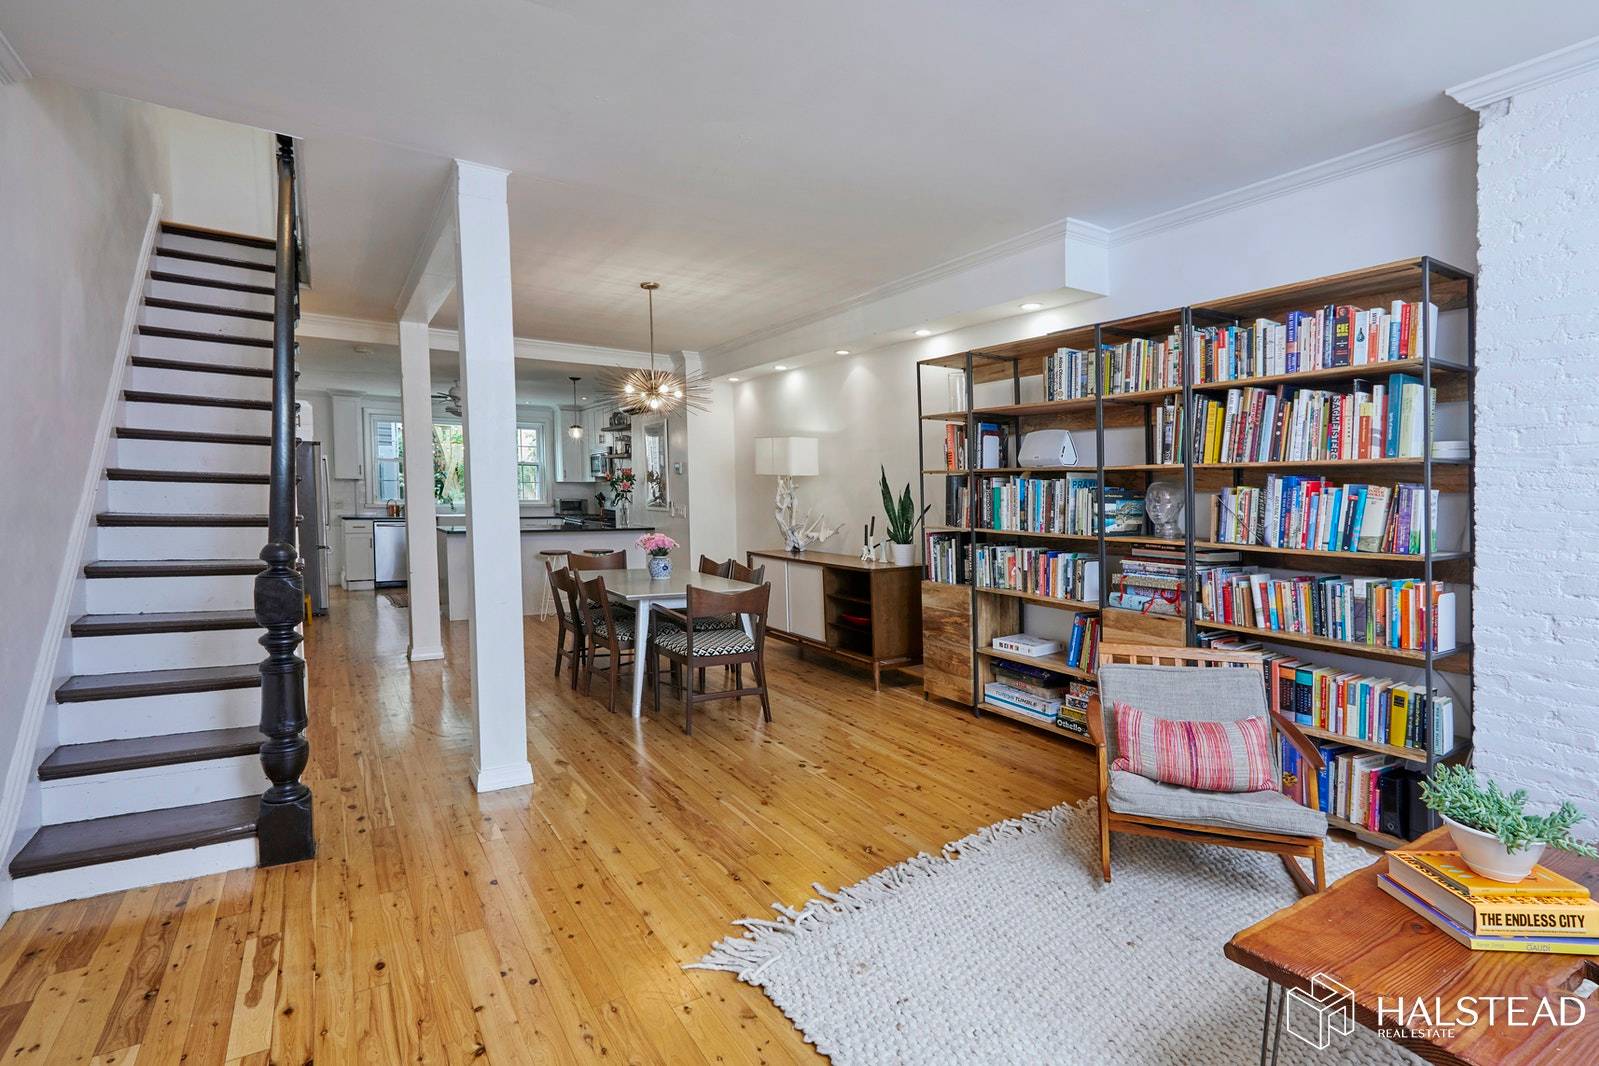 Set on a 100 foot lot on a prime Greenwood Heights block, 334 19th Street is an exquisitely renovated wood frame house with tremendous curb appeal.